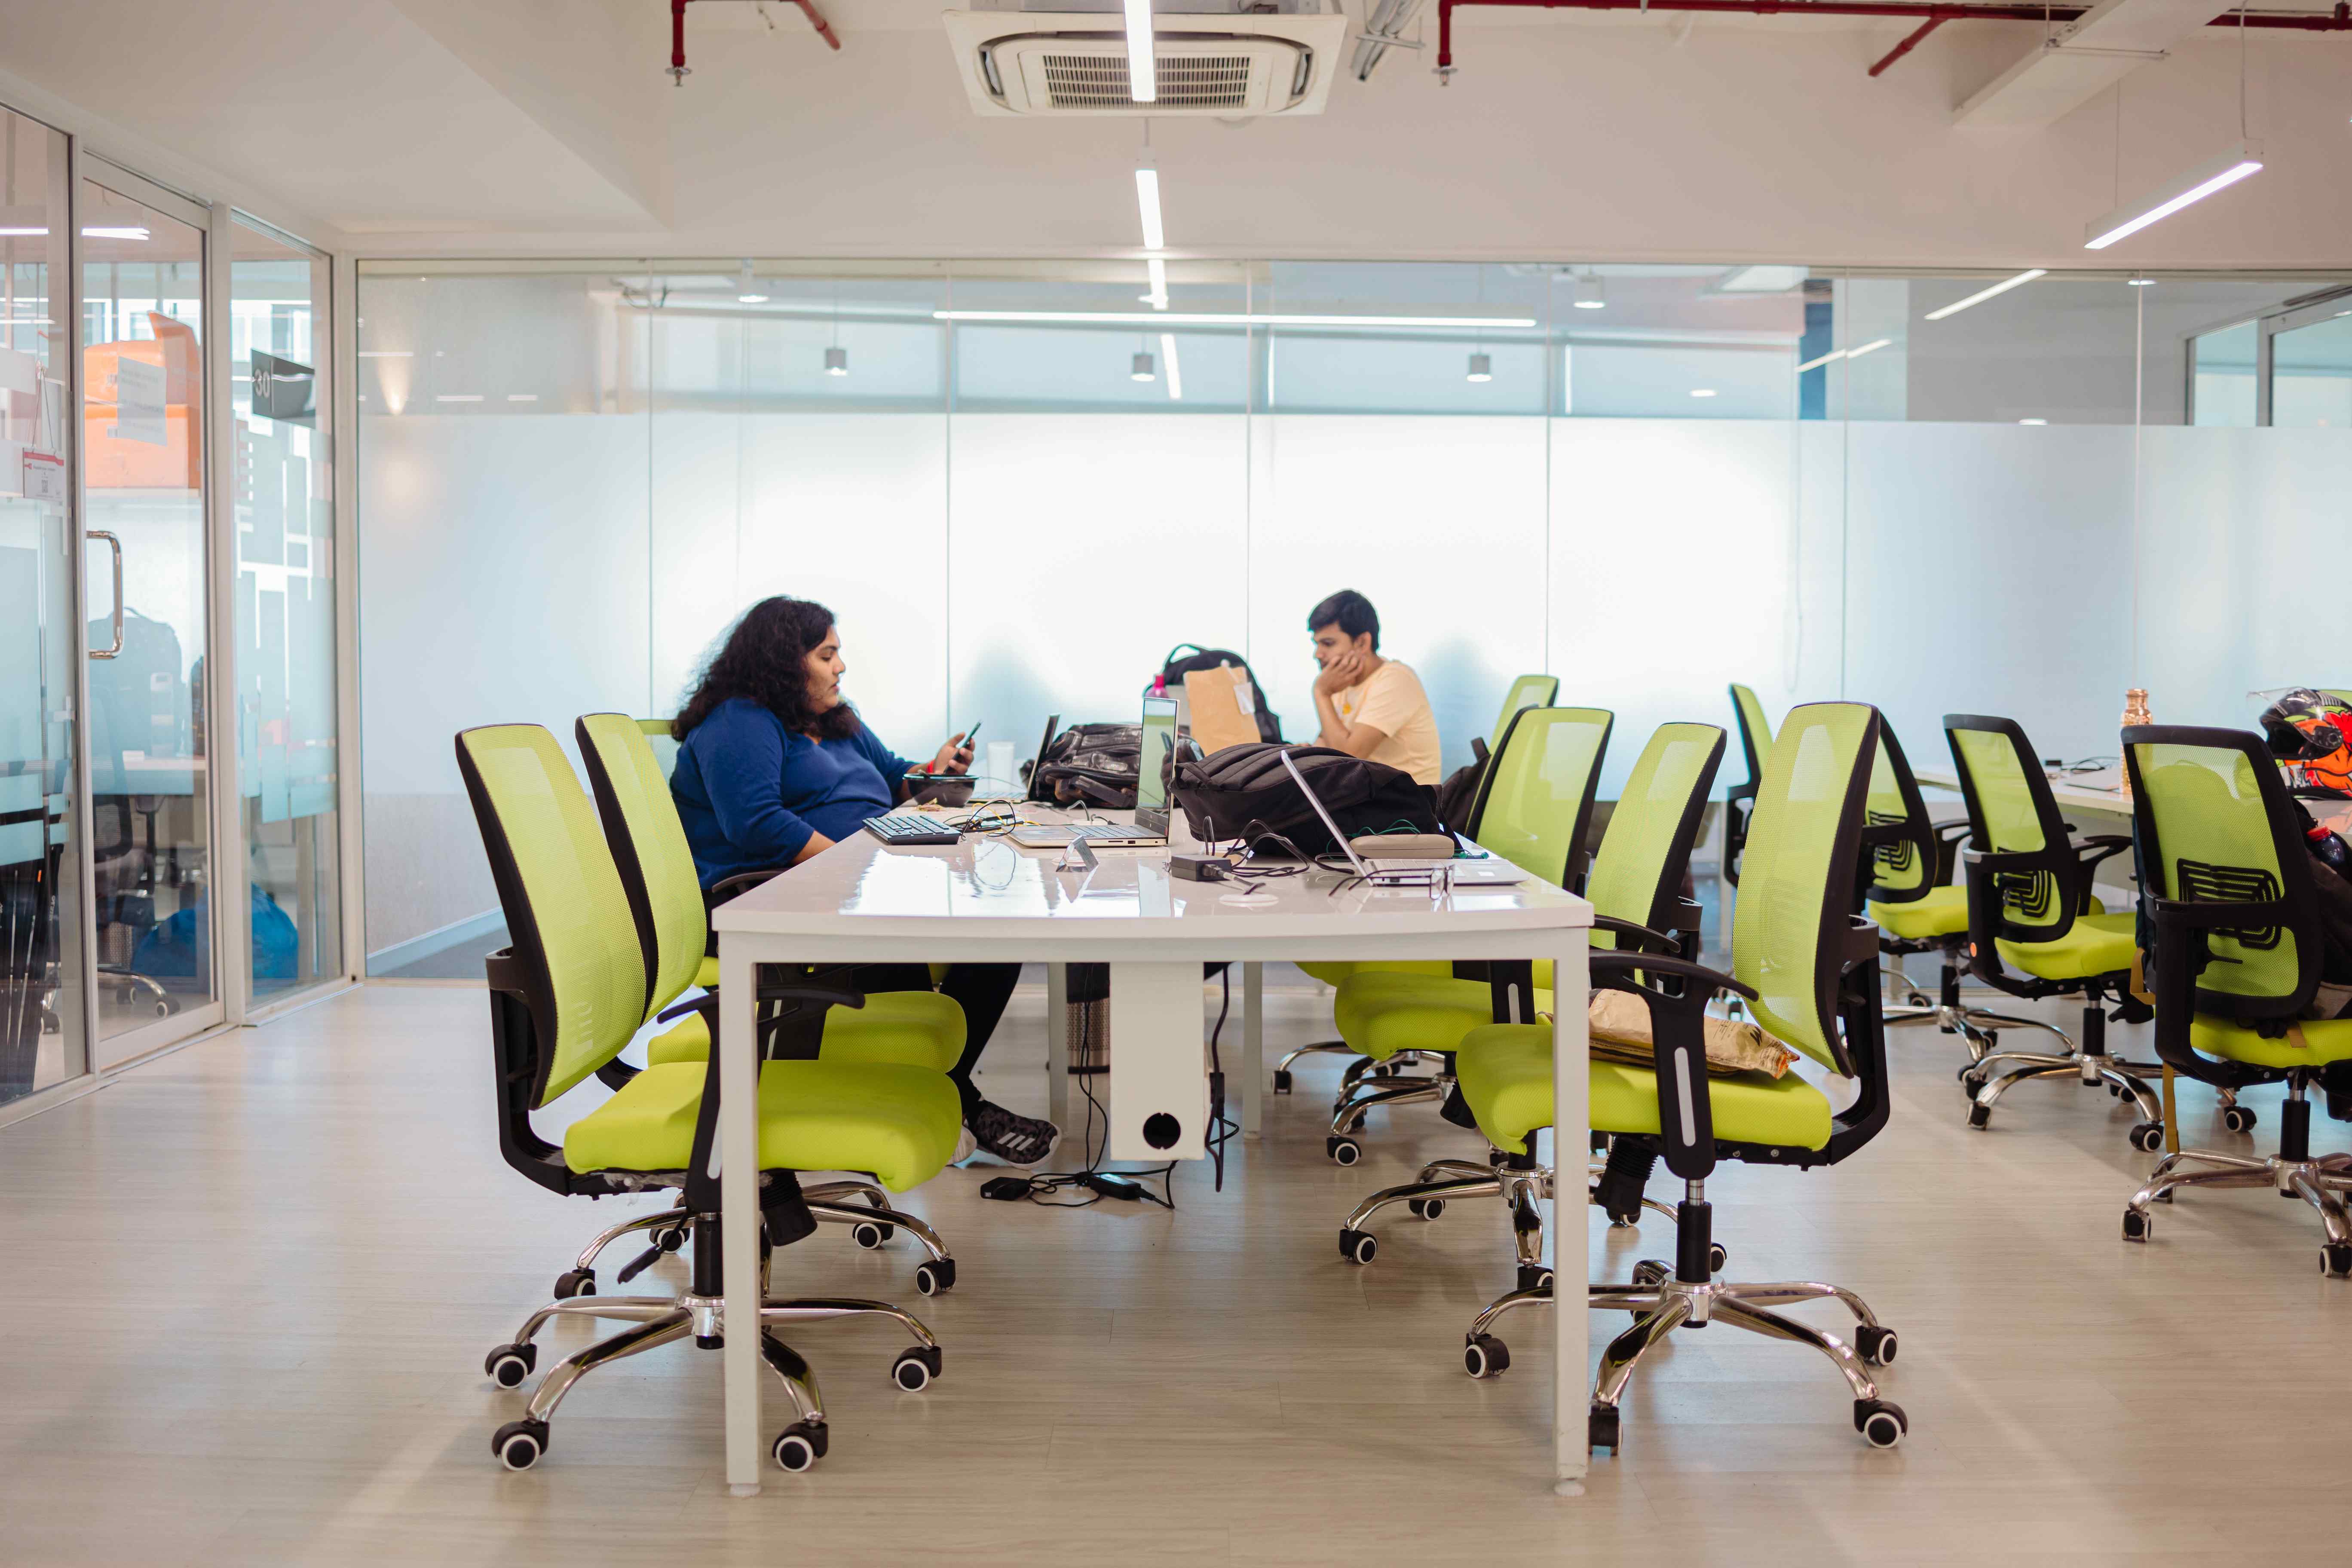 Top Coworking Space in Gurgaon at affordable rates by AltF Coworking G,Gurgaon, Haryana, India,Real Estate,Free Classifieds,Post Free Ads,77traders.com